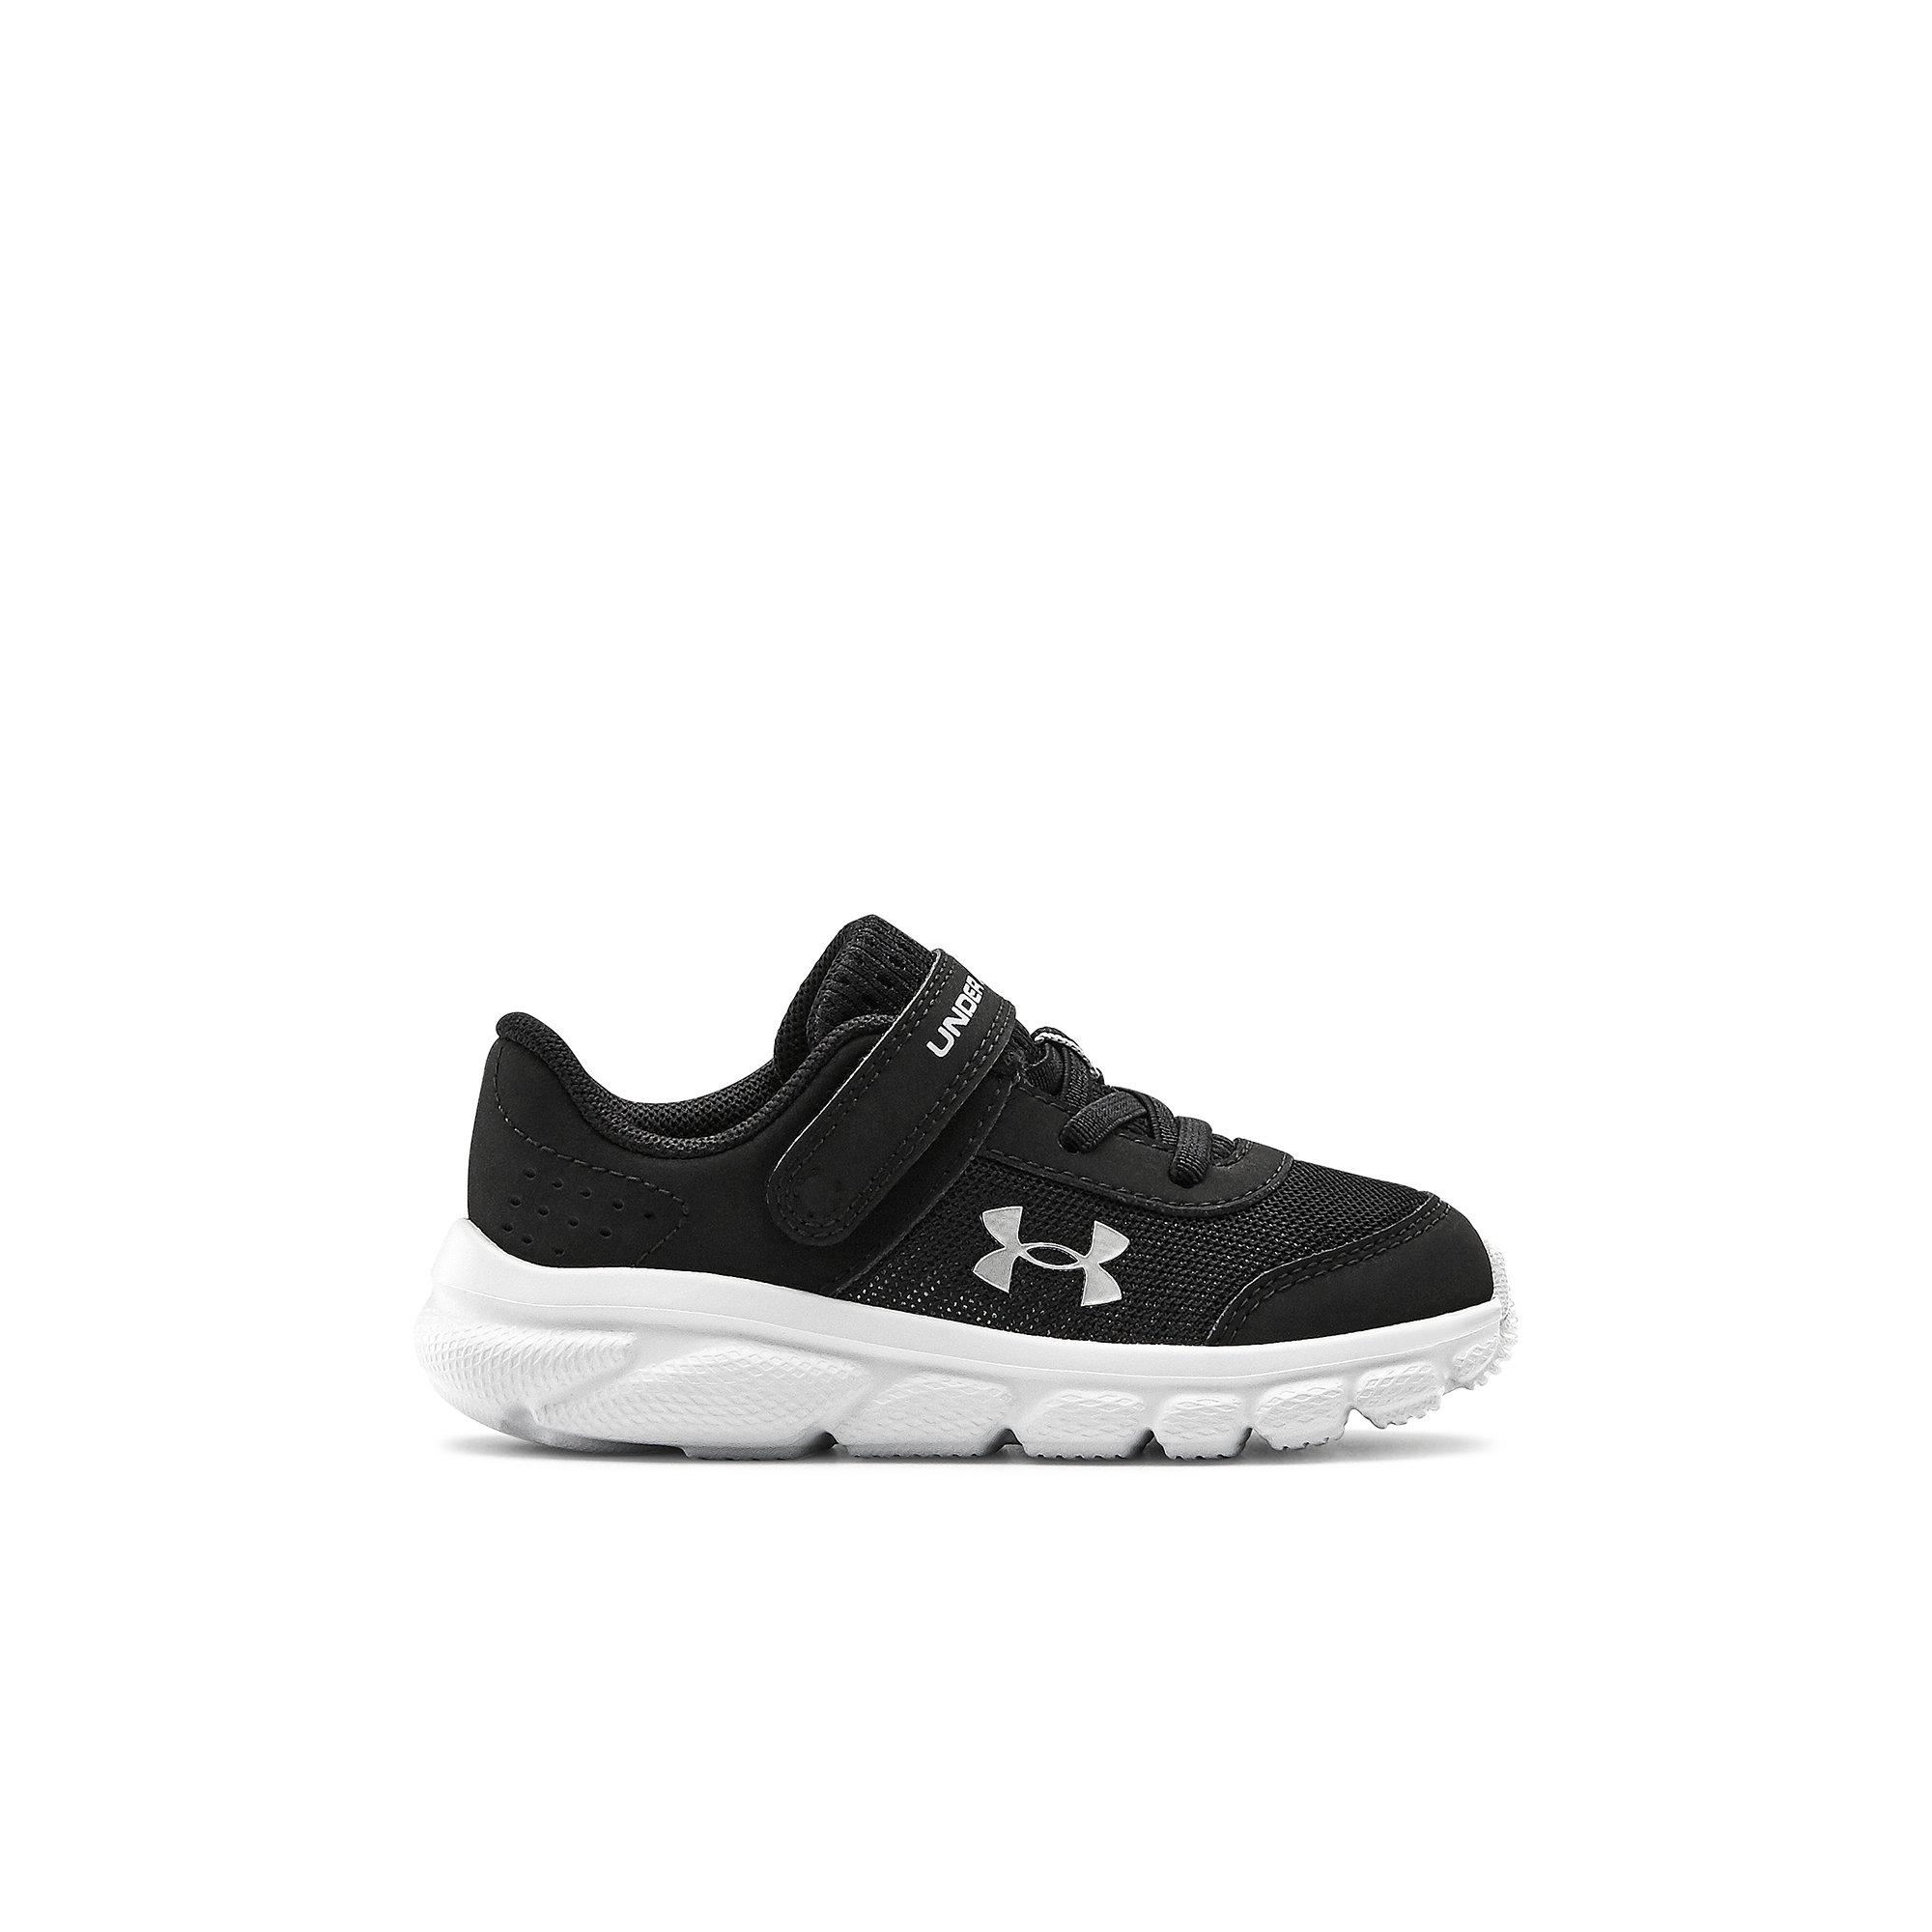 under armour shoes for infants